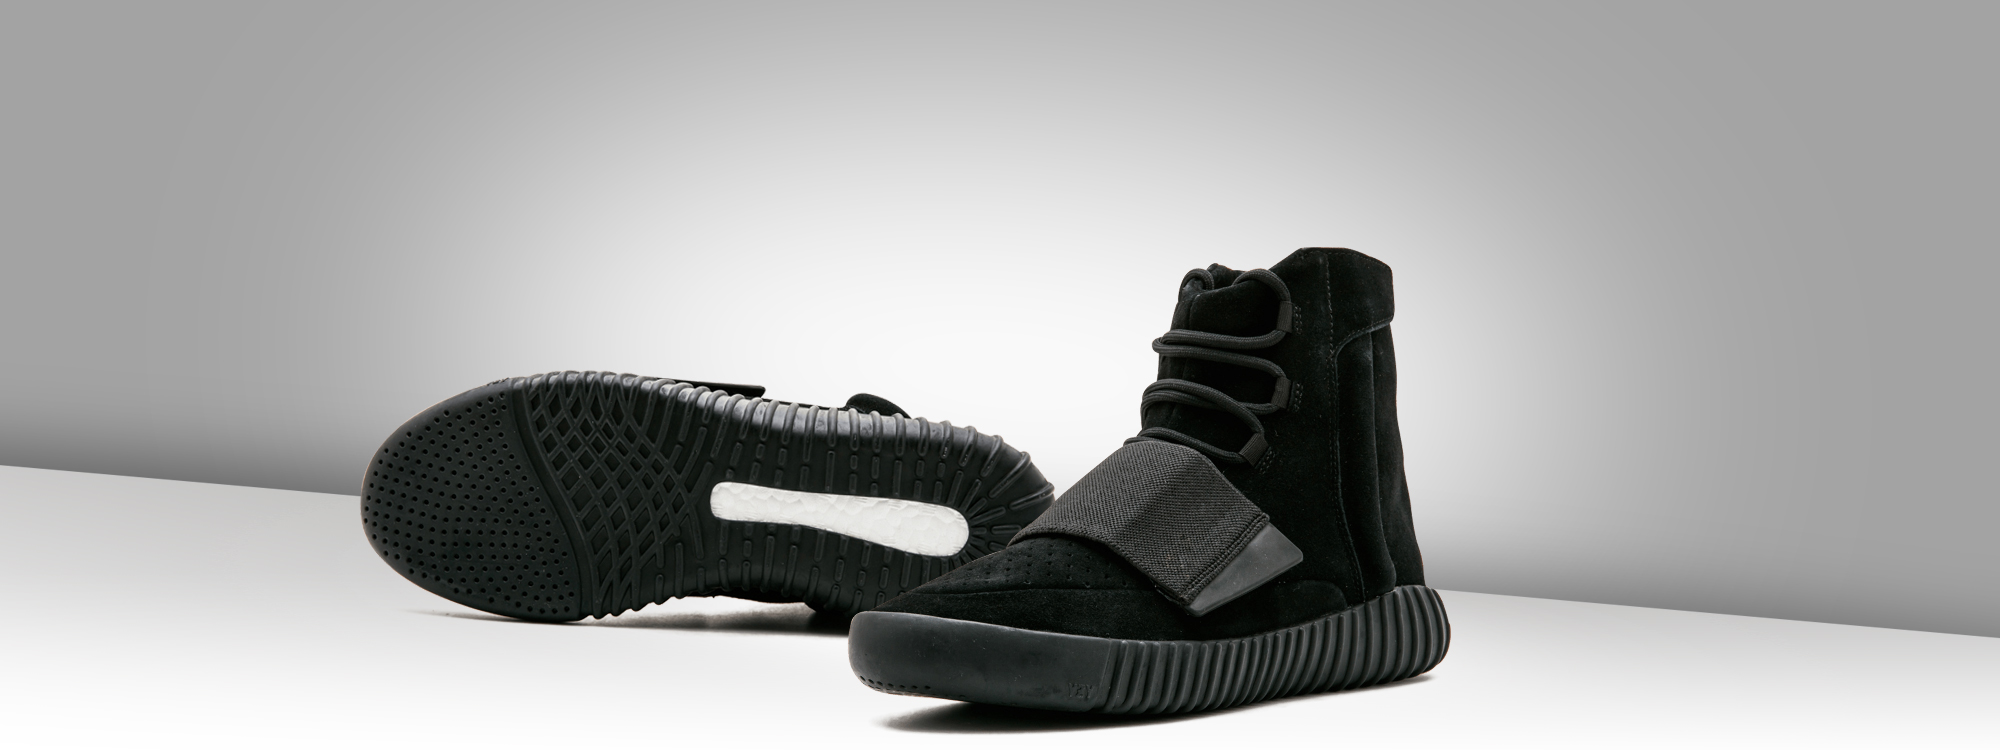  Yeezy Boost 750  Triple Black shoes price